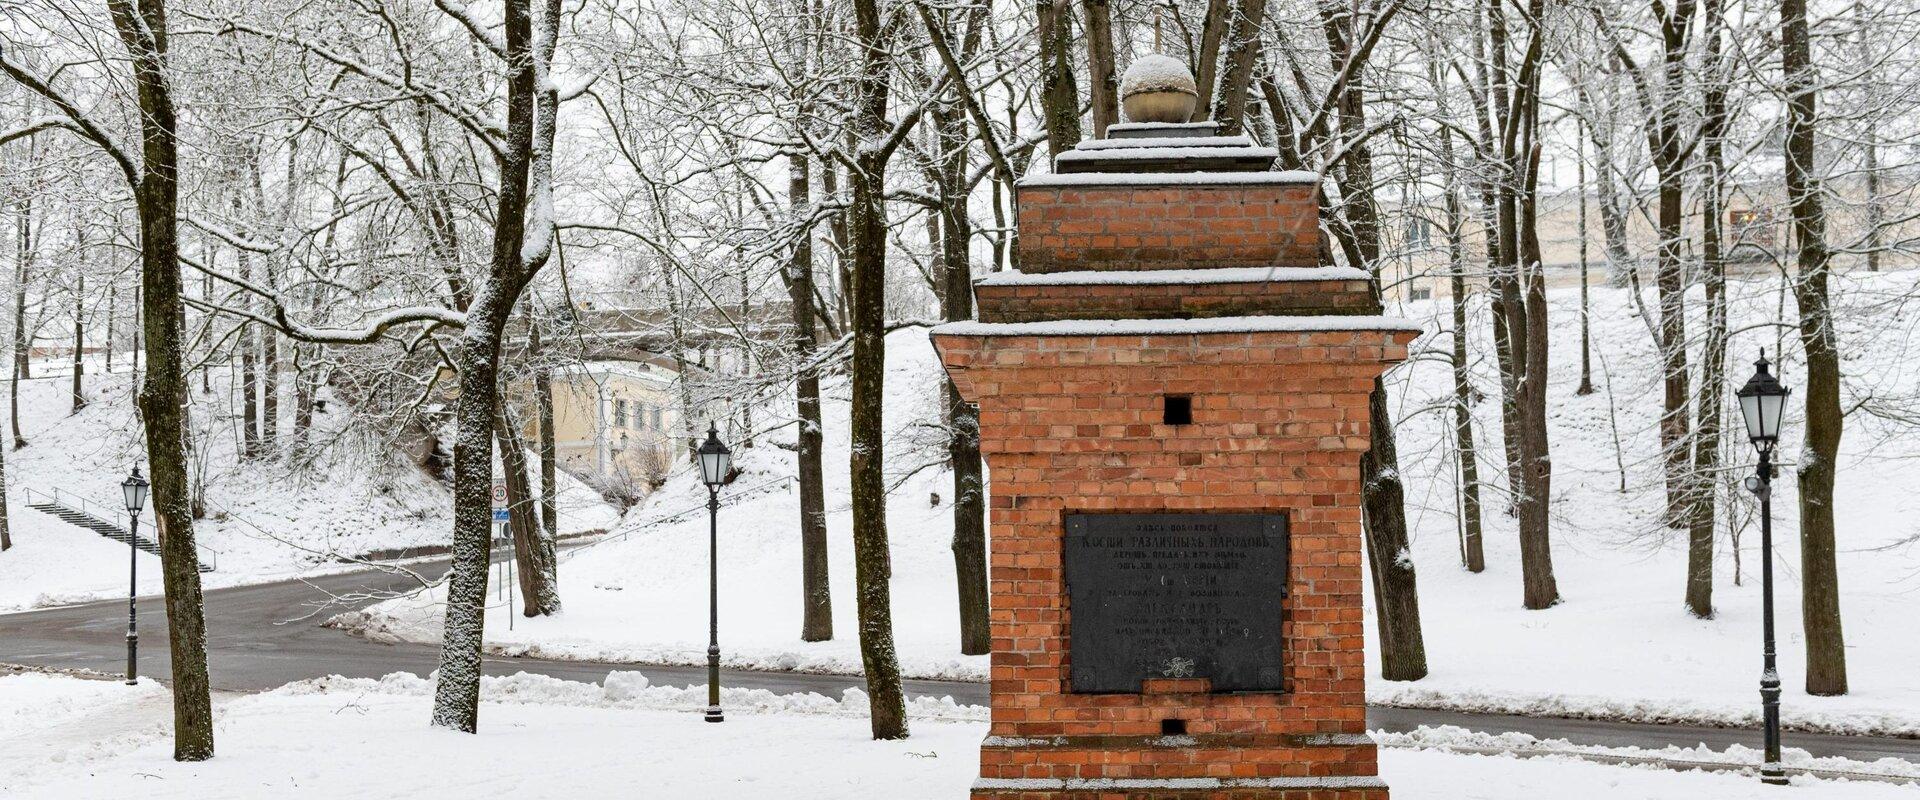 Monument to People in snowy winter